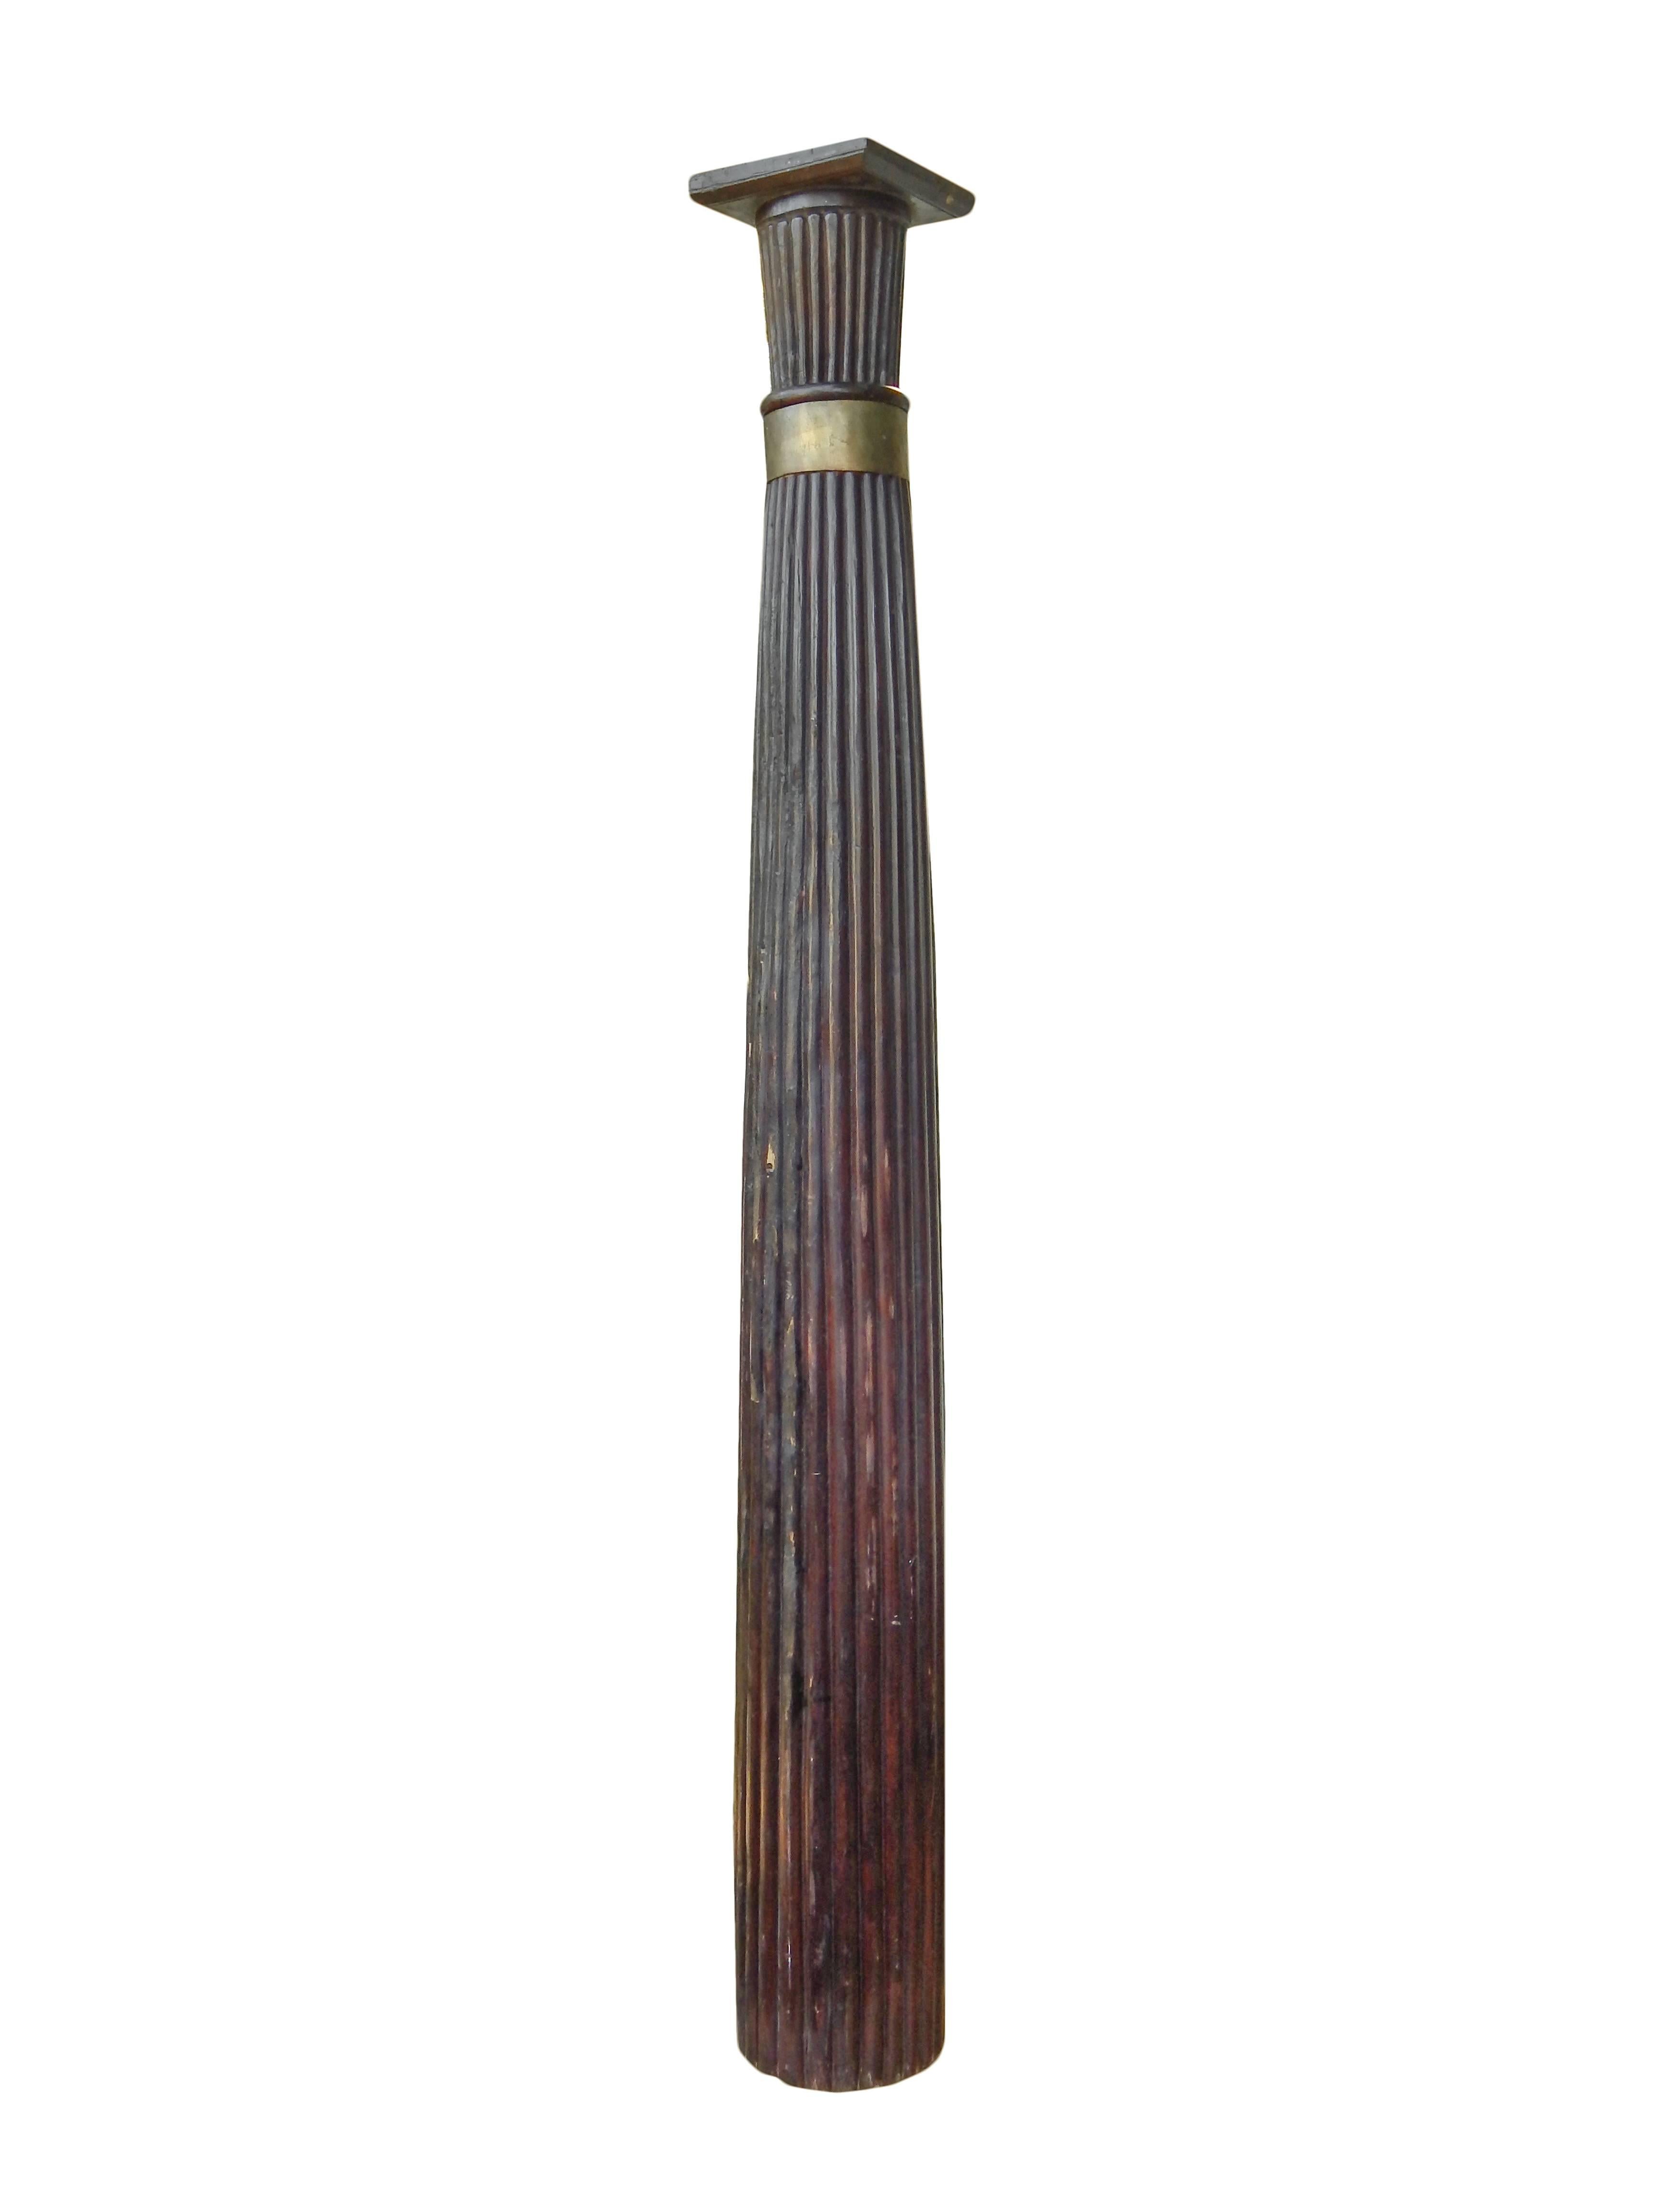 Indian Anglo-Raj Solid Rosewood Columns For Sale